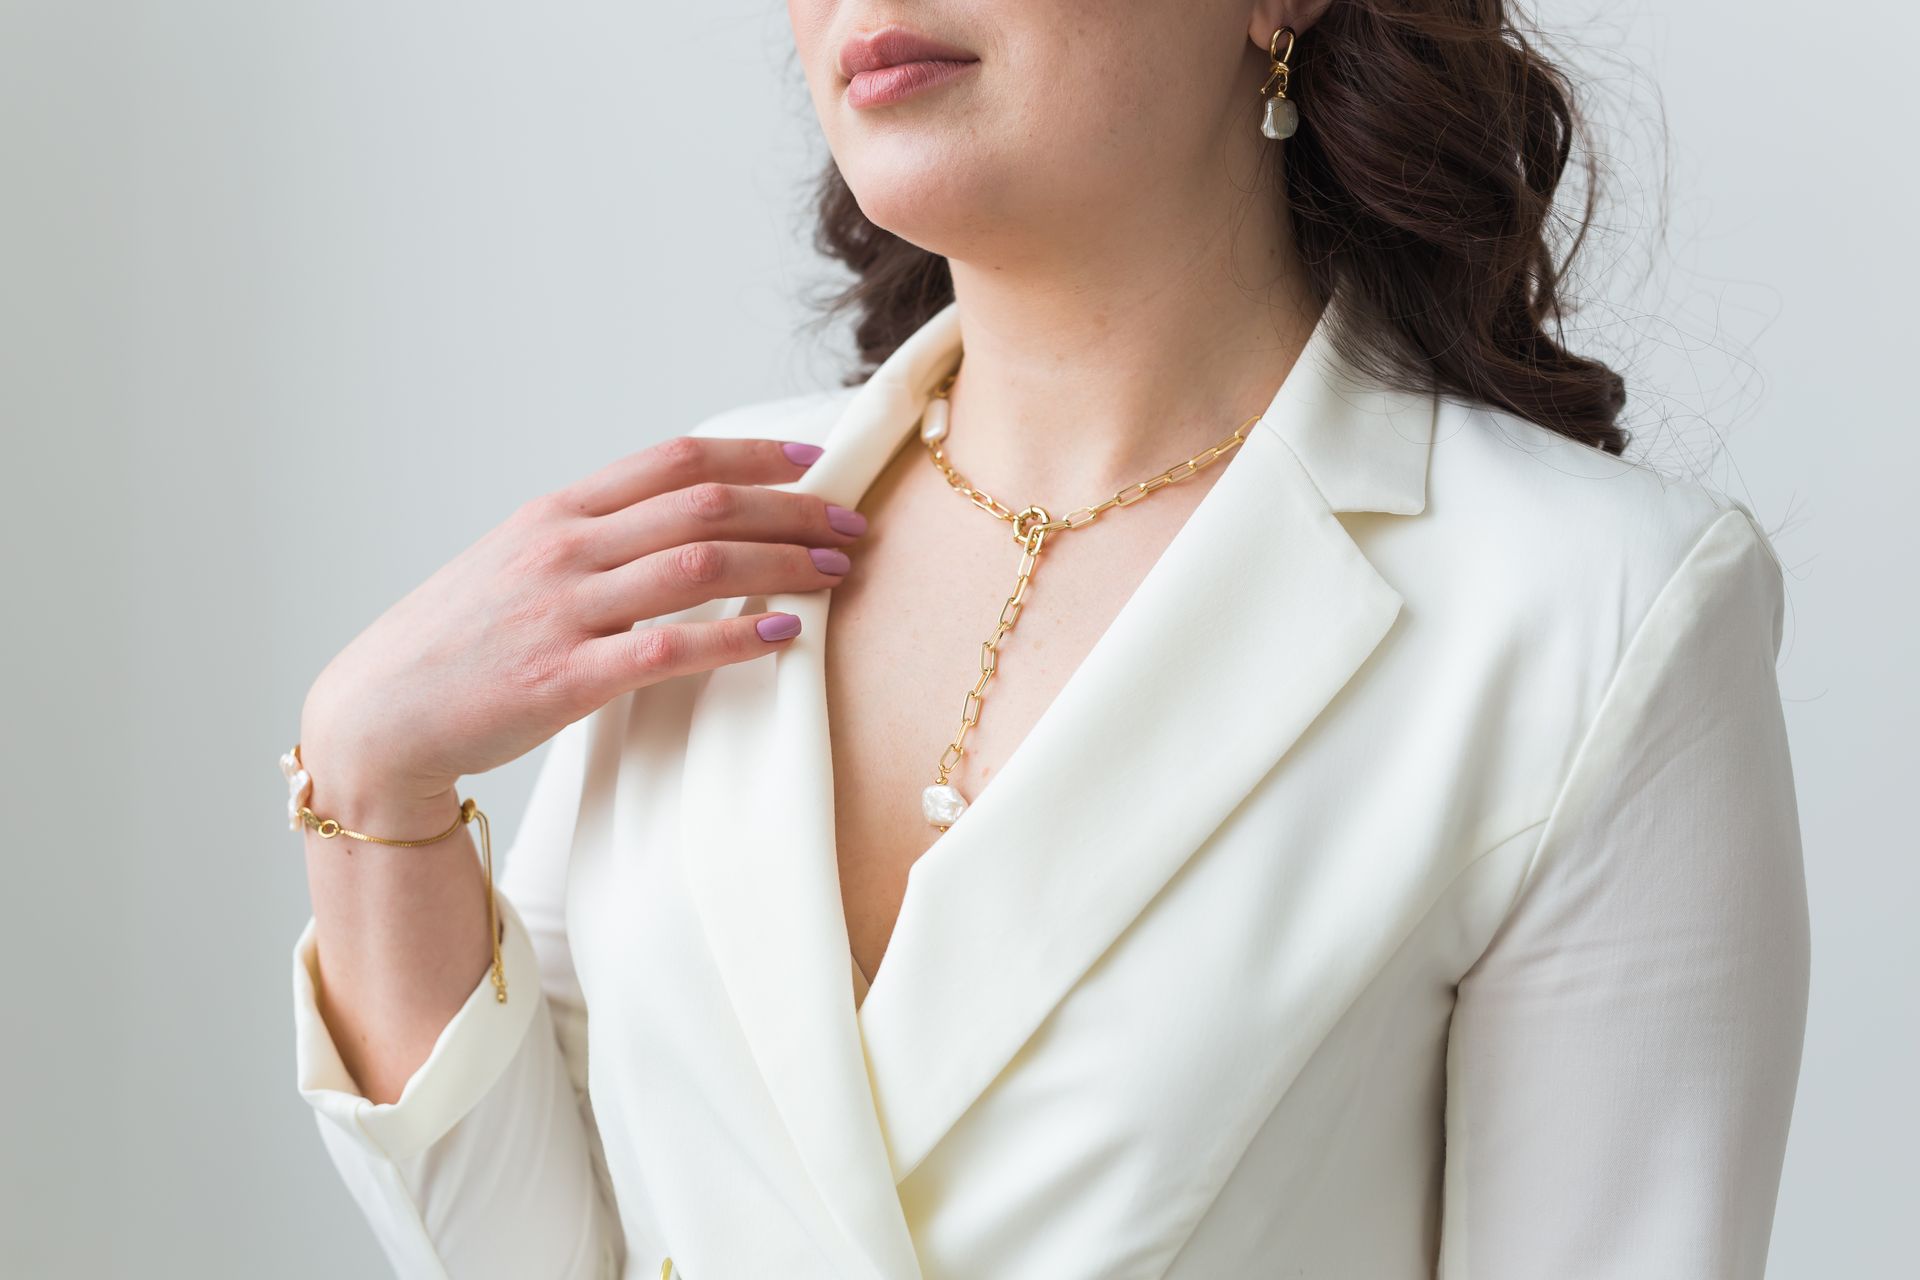 Woman in white blazer with gold jewelry